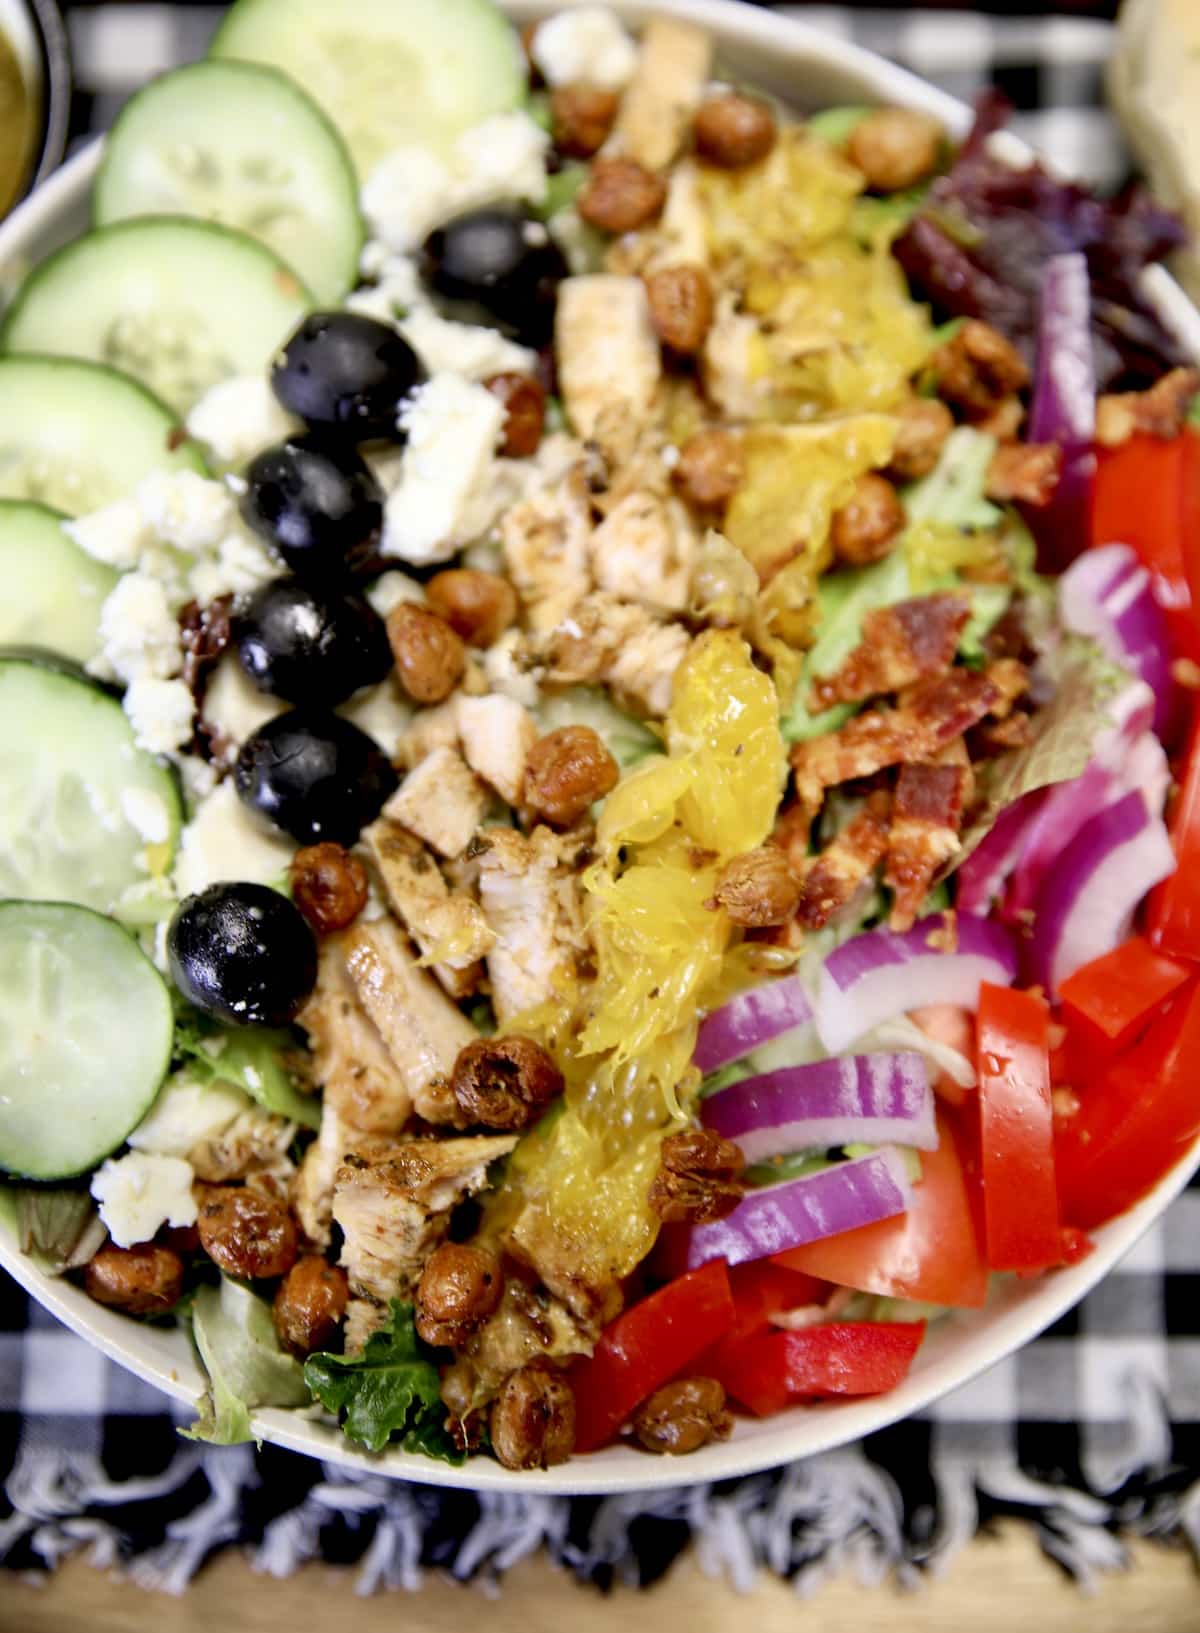 Greek salad with grilled chicken in a bowl.